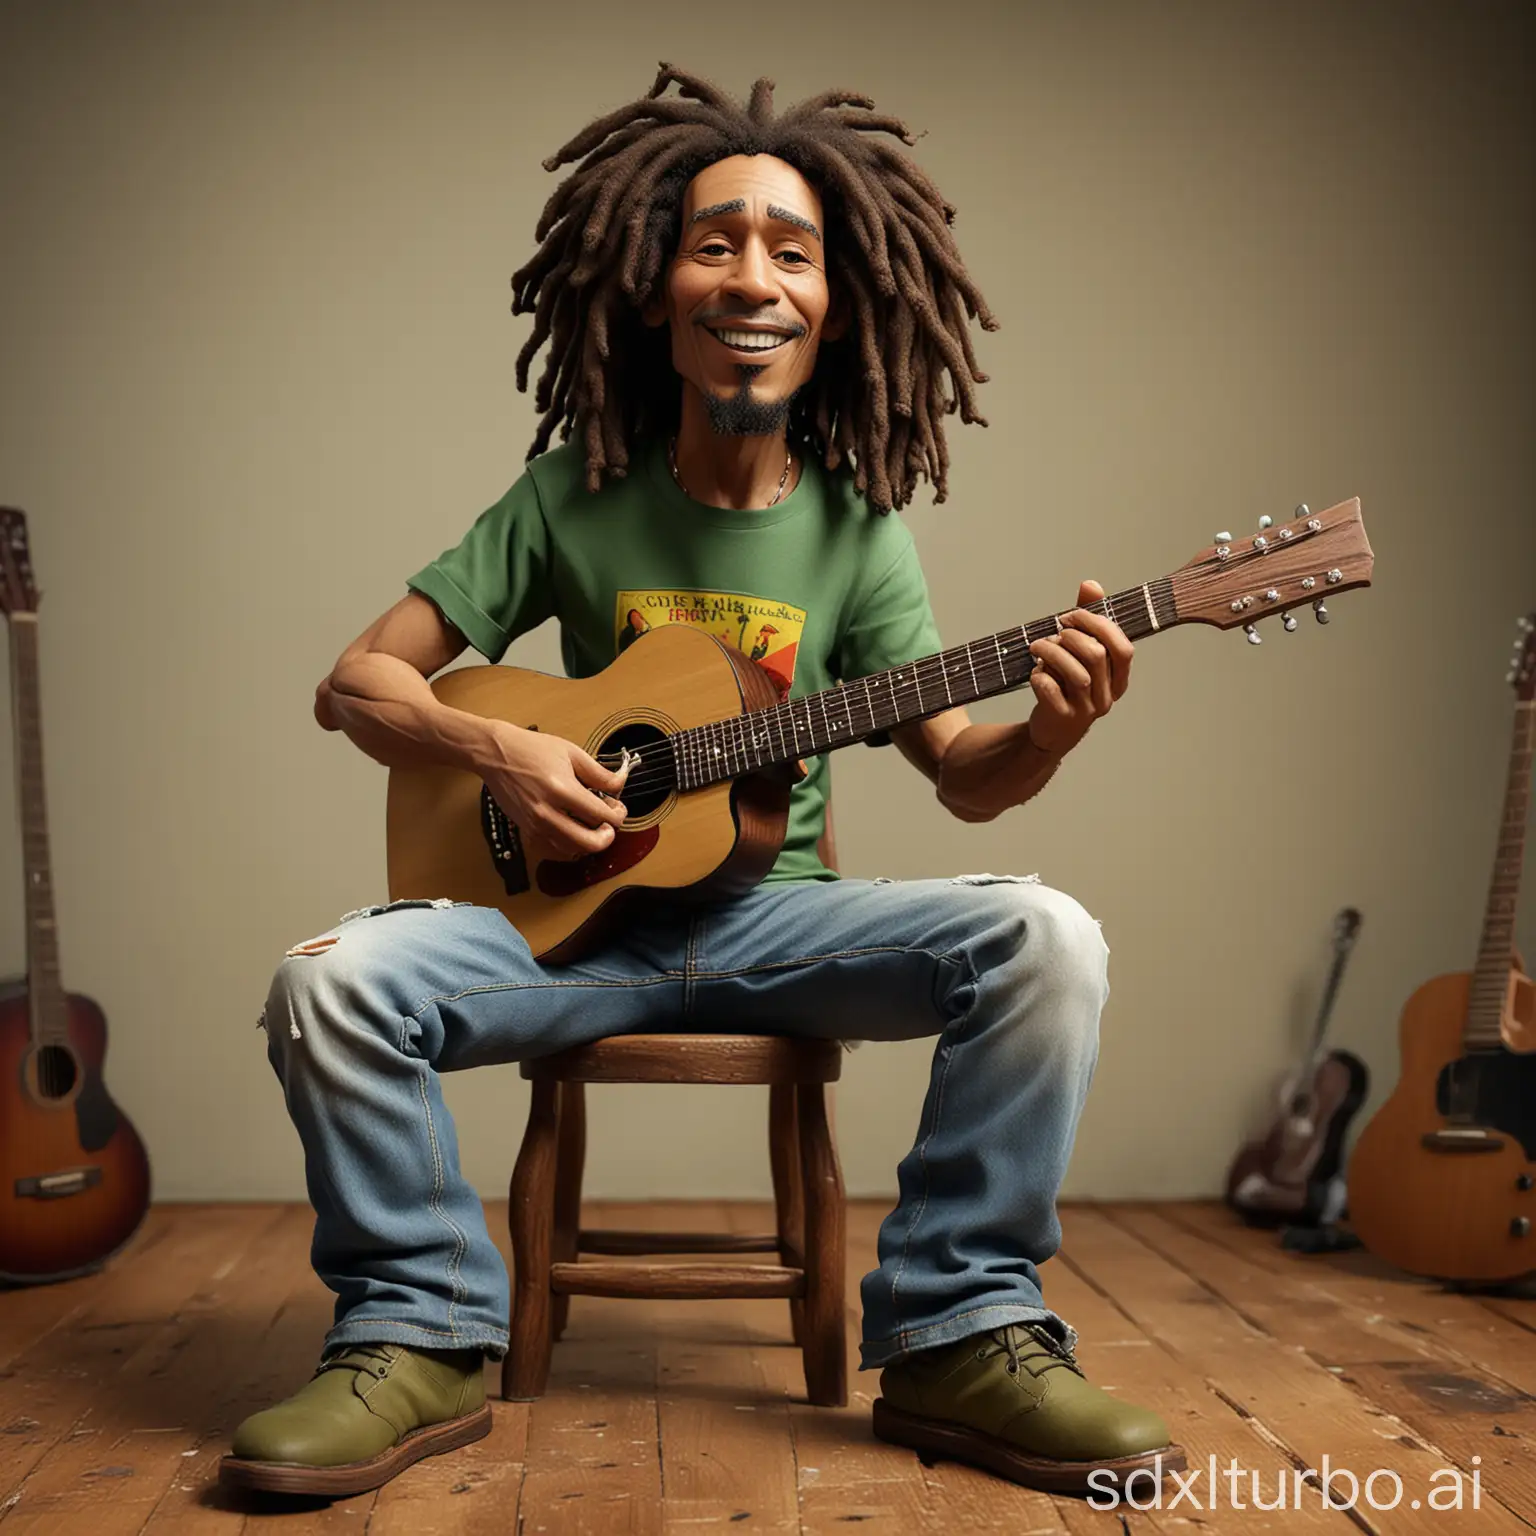  Create a realistic 3D caricature in the style of Disney Pixar, full body with a large head, of "Bob Marley," a 50-year-old man, sitting comfortably in an old wooden chair while playing an acoustic guitar of the Ibanez brand. He is wearing a green t-shirt with a white border and gray jeans that are worn and torn. He has brown flip-flops on and is sitting with his legs open. His right hand holds a cigar cigarette, and he strums the guitar with it, while his left hand presses down on the scales. The background is plain and contrasts with the colors of the chair and Bob Marley's clothes to improve the overall image composition. Use soft photographic lighting, dramatic overhead lighting, and very high image quality, with clear character details in UHD 16k resolution.